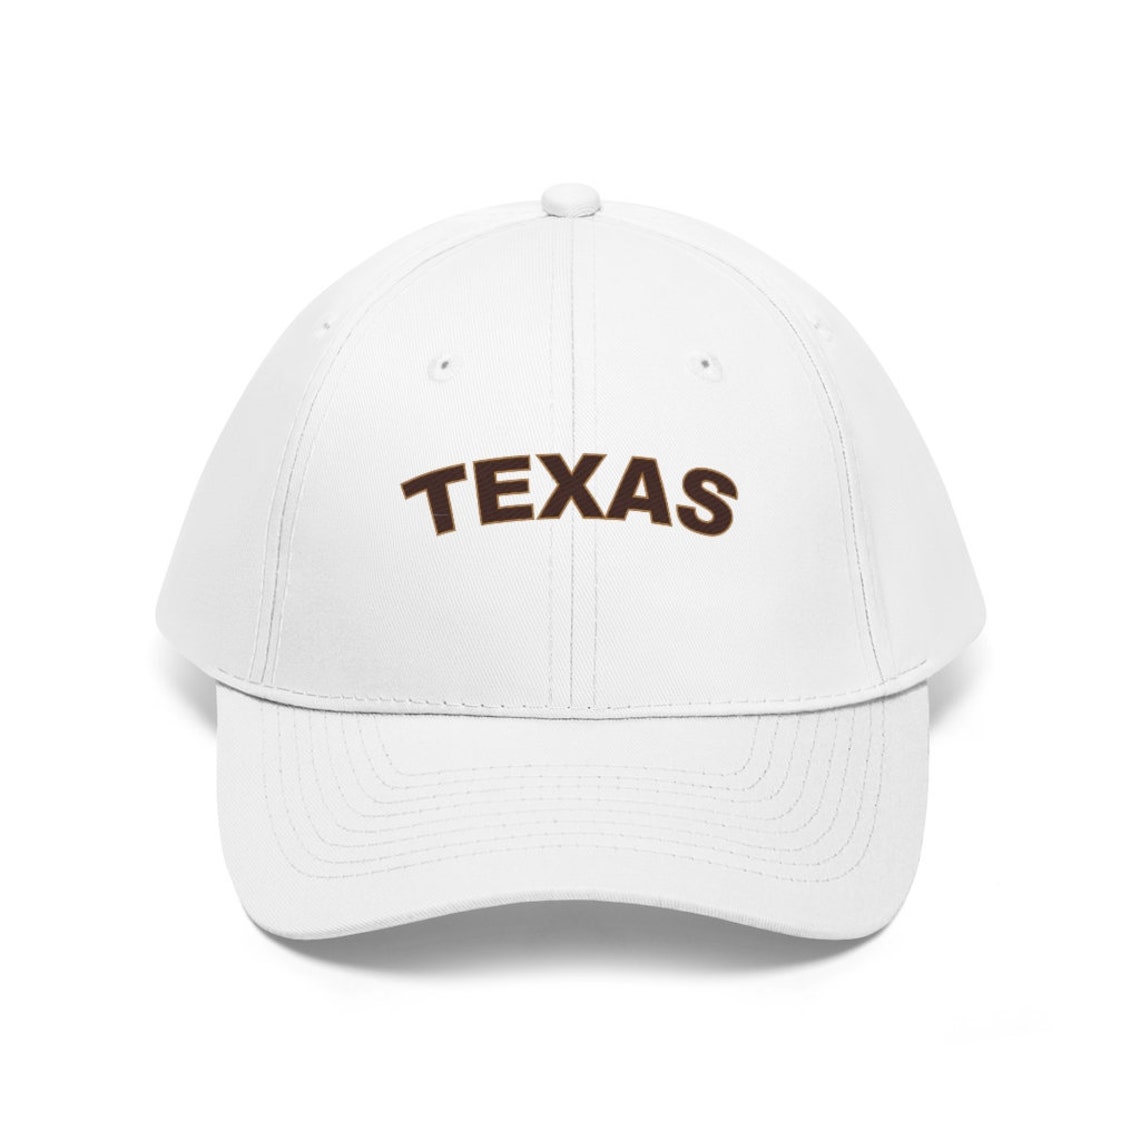 TEXAS Cap Unisex Twill Souvenir Gift Hat with curved | Etsy